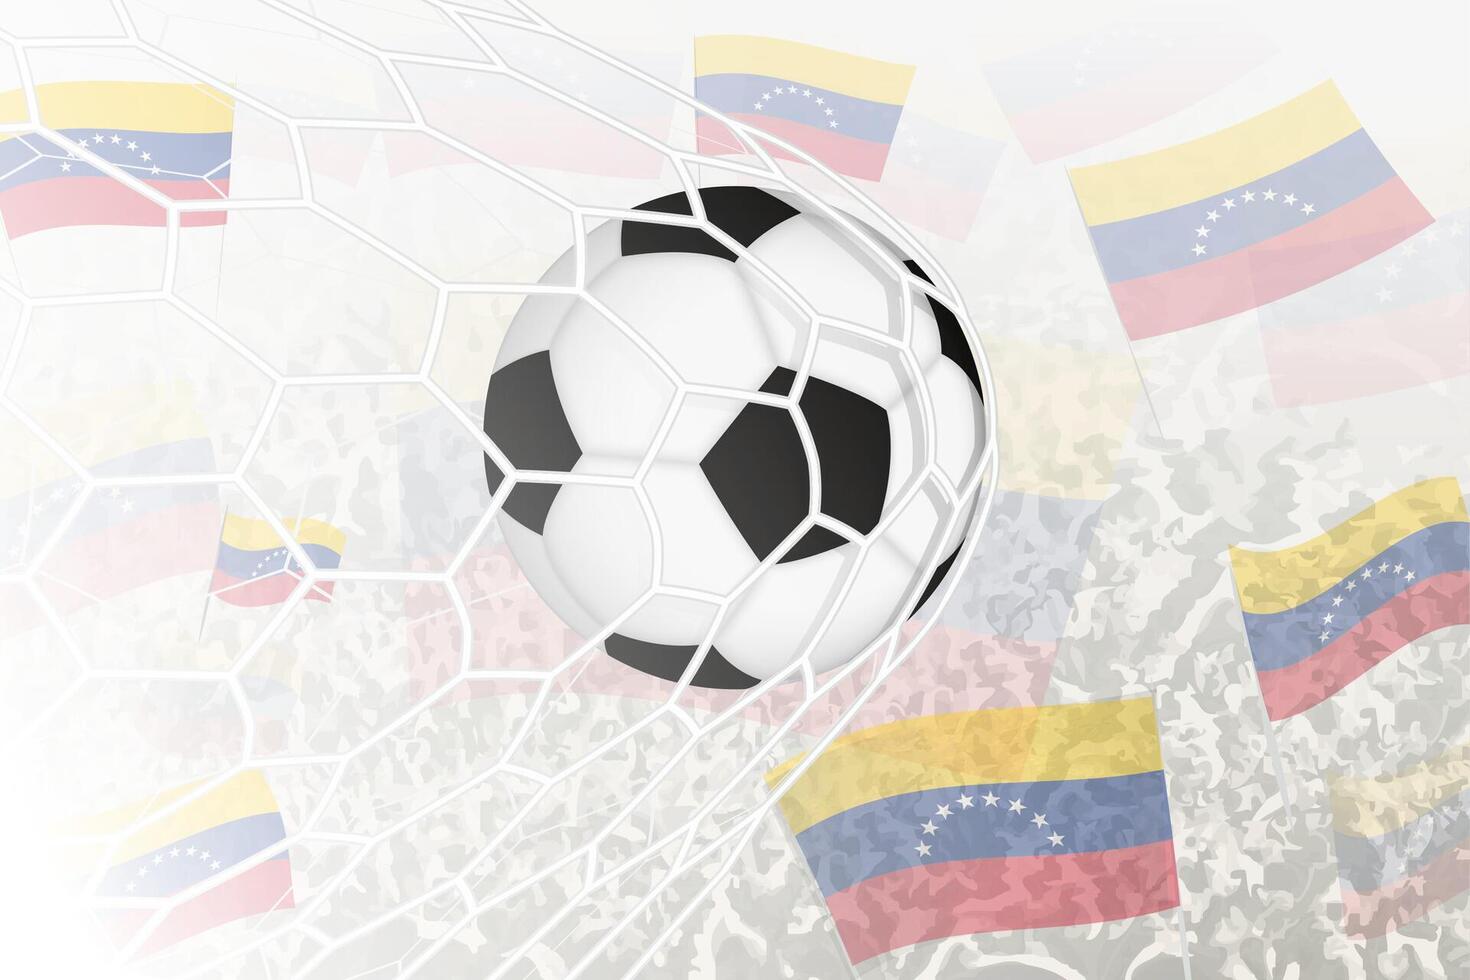 National Football team of Venezuela scored goal. Ball in goal net, while football supporters are waving the Venezuela flag in the background. vector